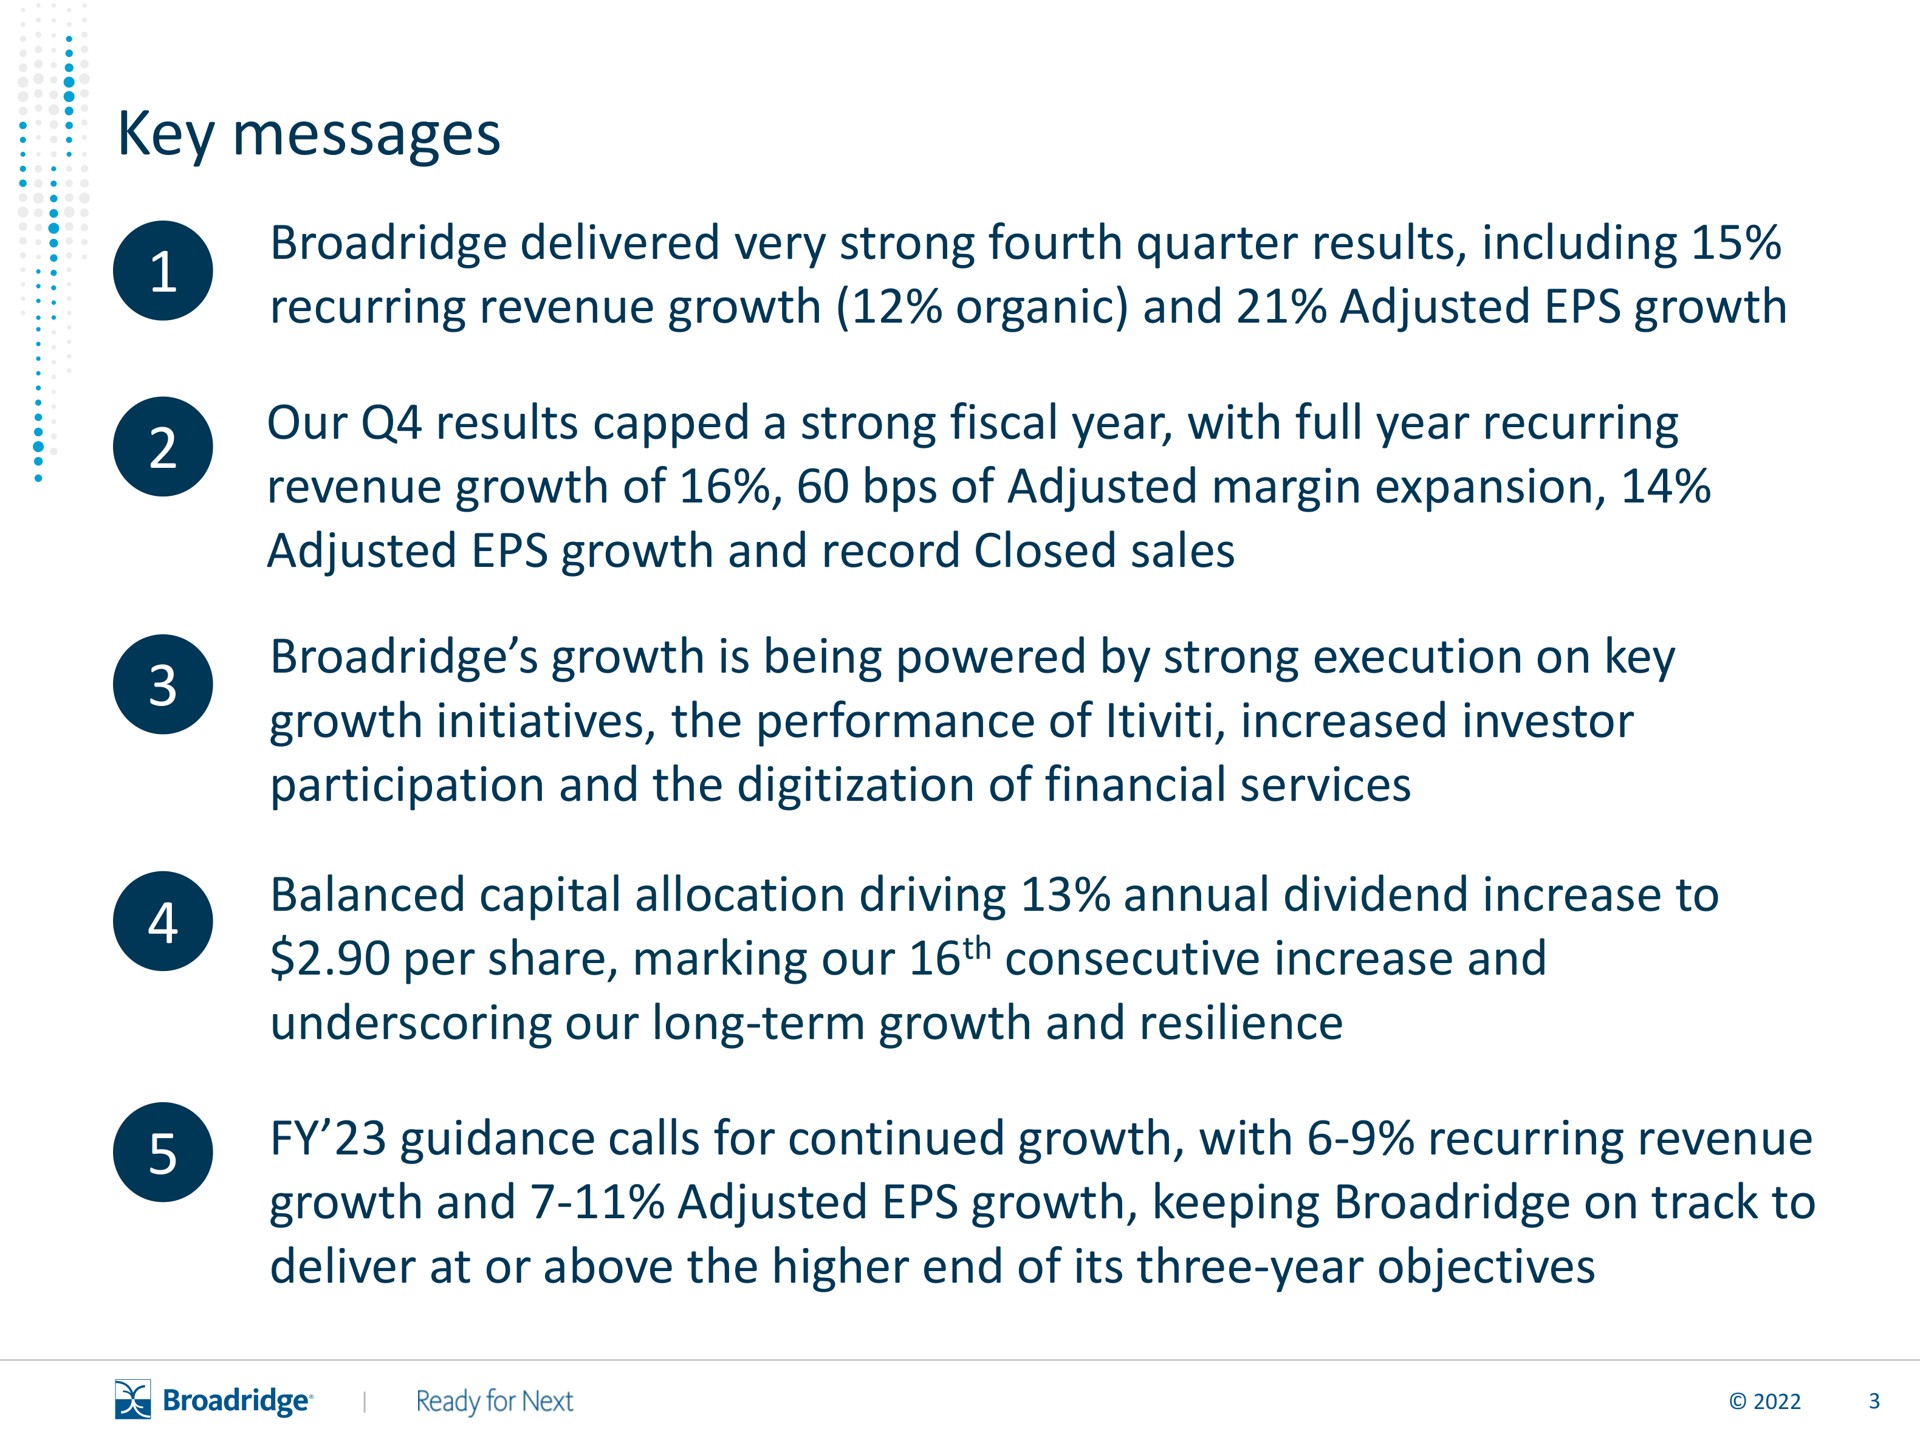 key messages delivered very strong fourth quarter results including recurring revenue growth organic and adjusted growth our results capped a strong fiscal year with full year recurring revenue growth of of adjusted margin expansion adjusted growth and record closed sales growth is being powered by strong execution on key growth initiatives the performance of increased investor participation and the of financial services balanced capital allocation driving annual dividend increase to per share marking our consecutive increase and underscoring our long term growth and resilience guidance calls for continued growth with recurring revenue growth and adjusted growth keeping on track to deliver at or above the higher end of its three year objectives | Broadridge Financial Solutions